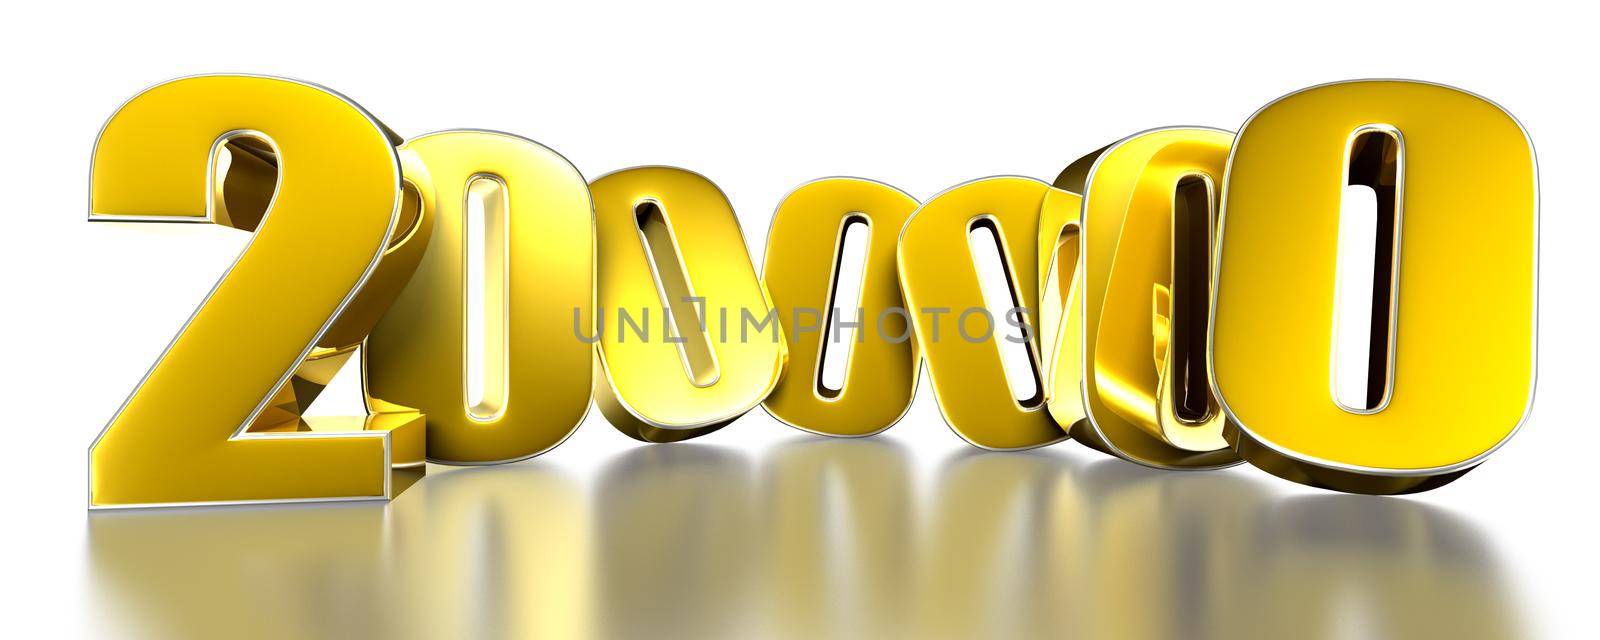 2 000 000 gold 3D illustration on white background with clipping path. by thitimontoyai